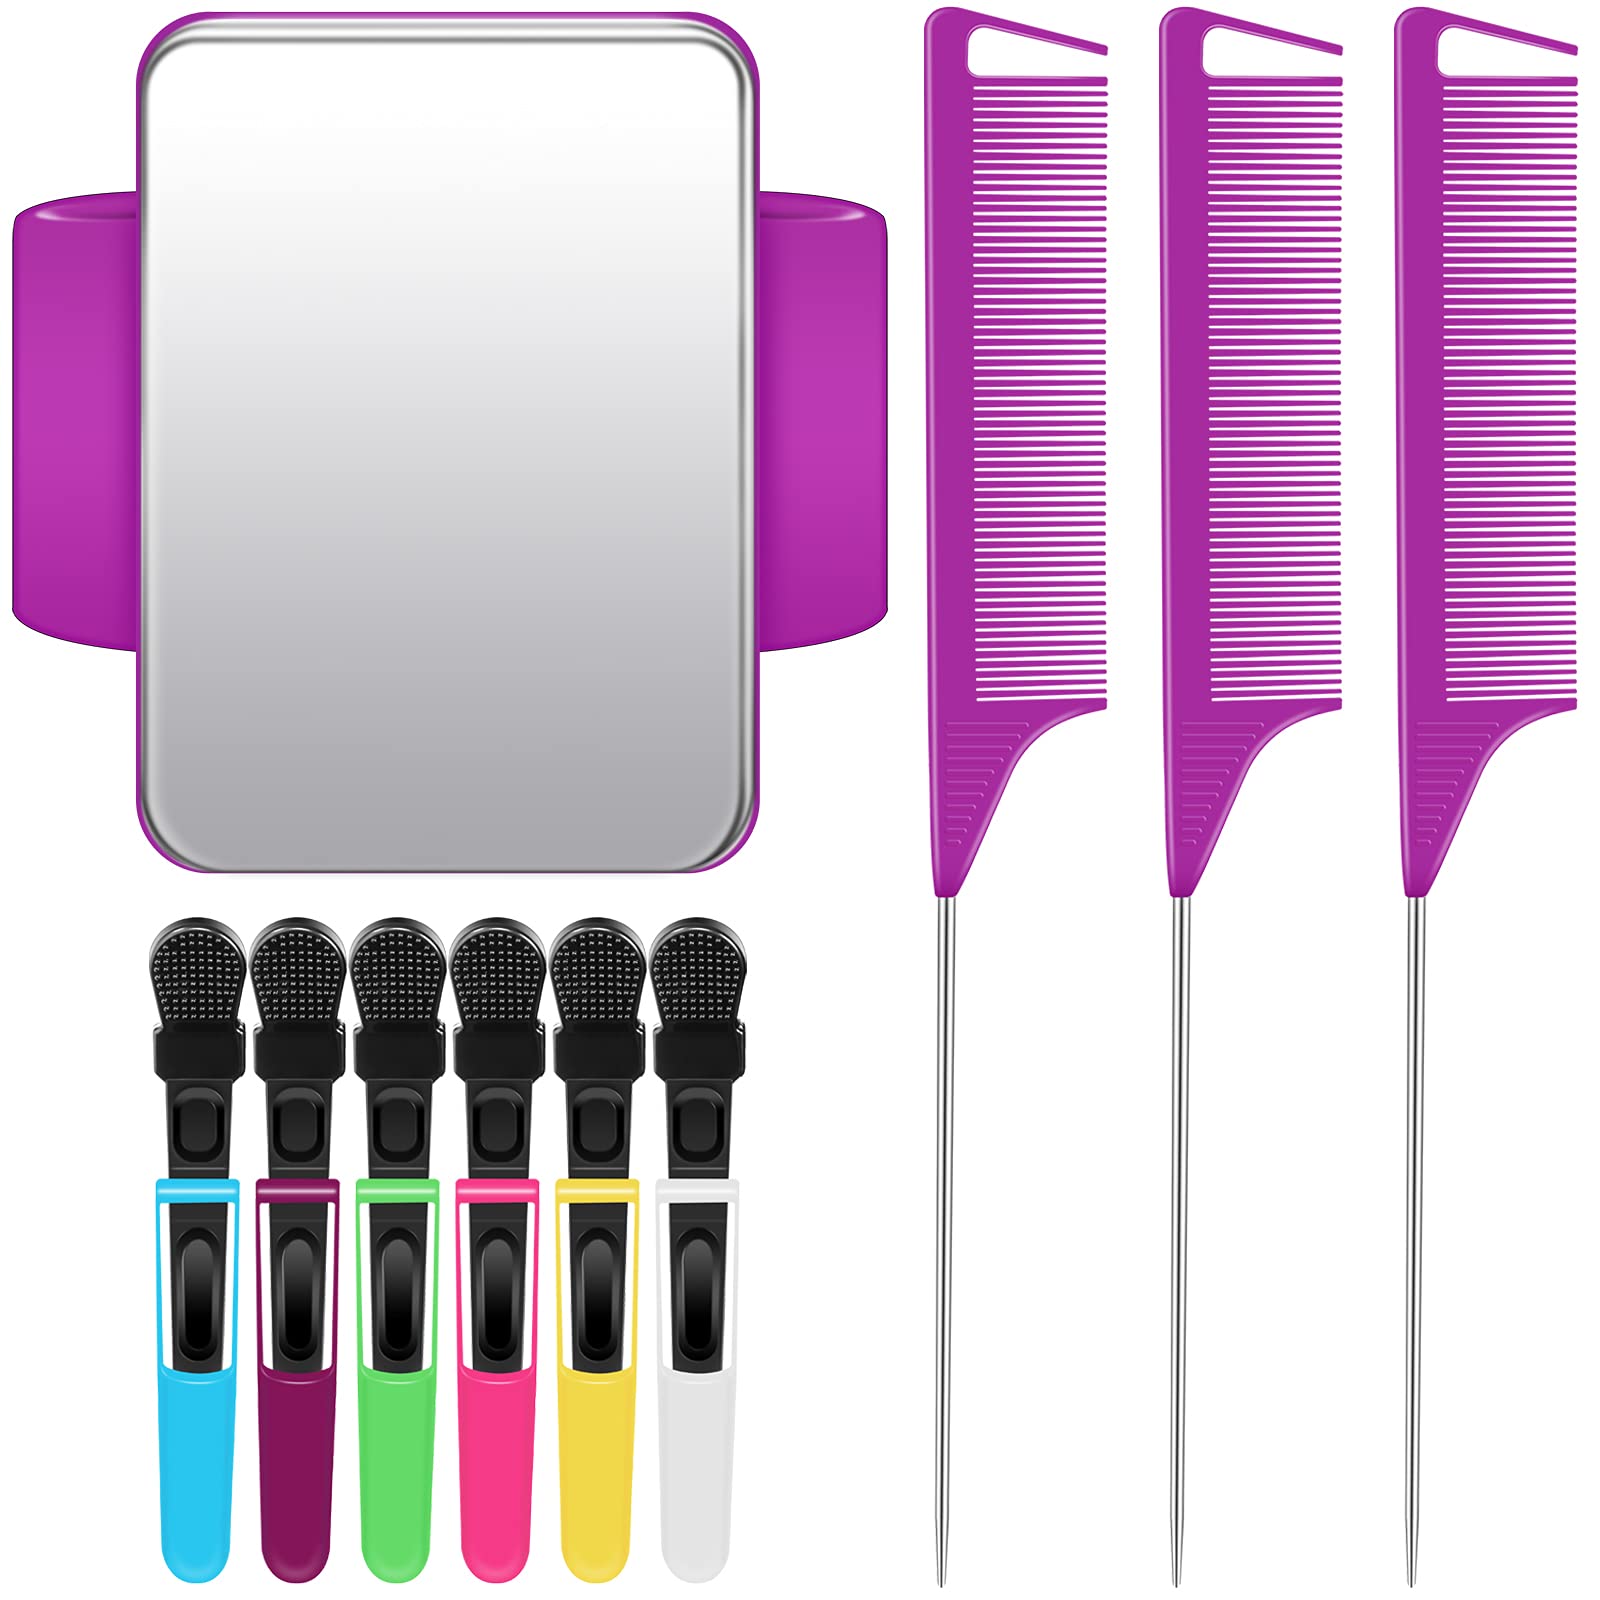  FRCOLOR 2 Sets hairdressing tools set hair styling tools hair  cutting tool Magnetic hairpin wristband Tip tail combs silicone wristbands  hair teasing comb magnetic wristband needle cushion : Beauty 